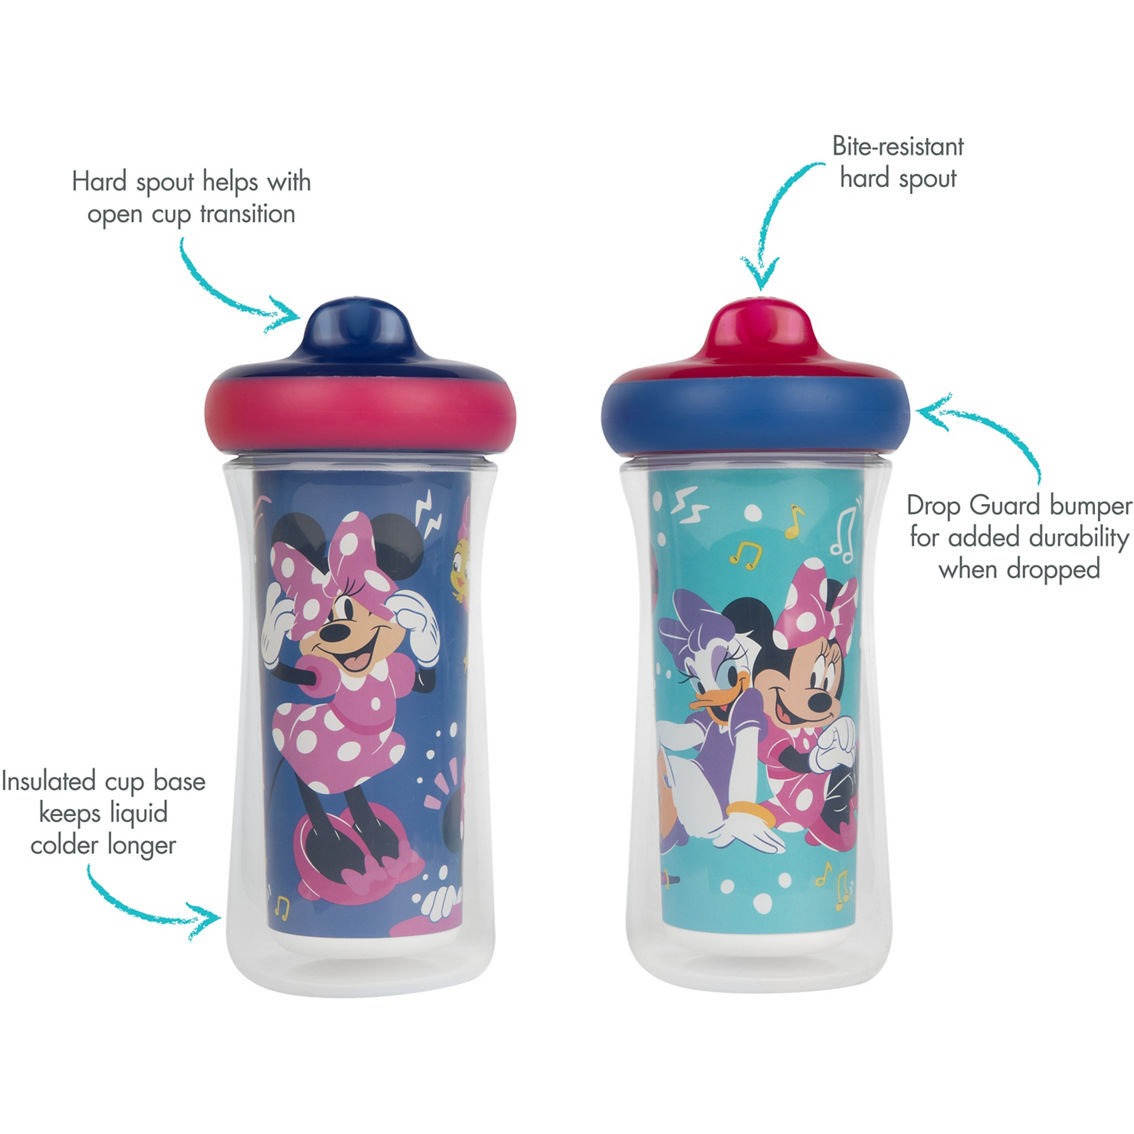 Disney Baby Minnie Mouse Insulated Sippy Cup 2 pk. - Image 6 of 6